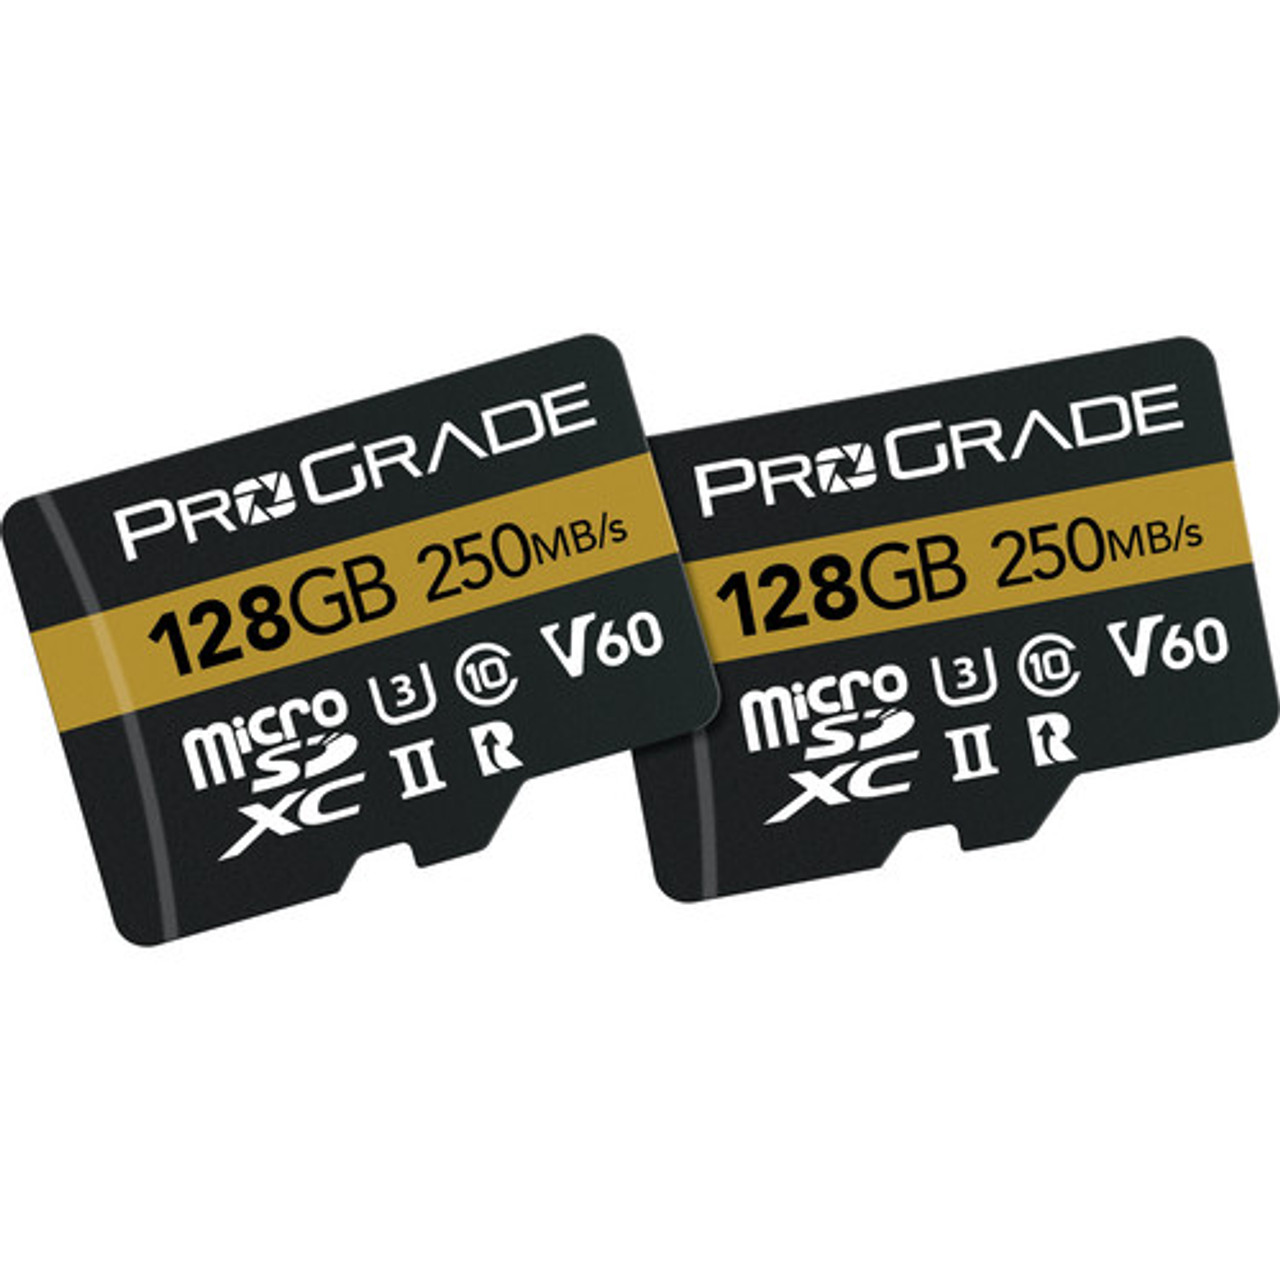 ProGrade Digital 128GB UHS-II microSDXC Memory Card with SD Adapter - 2 PACK